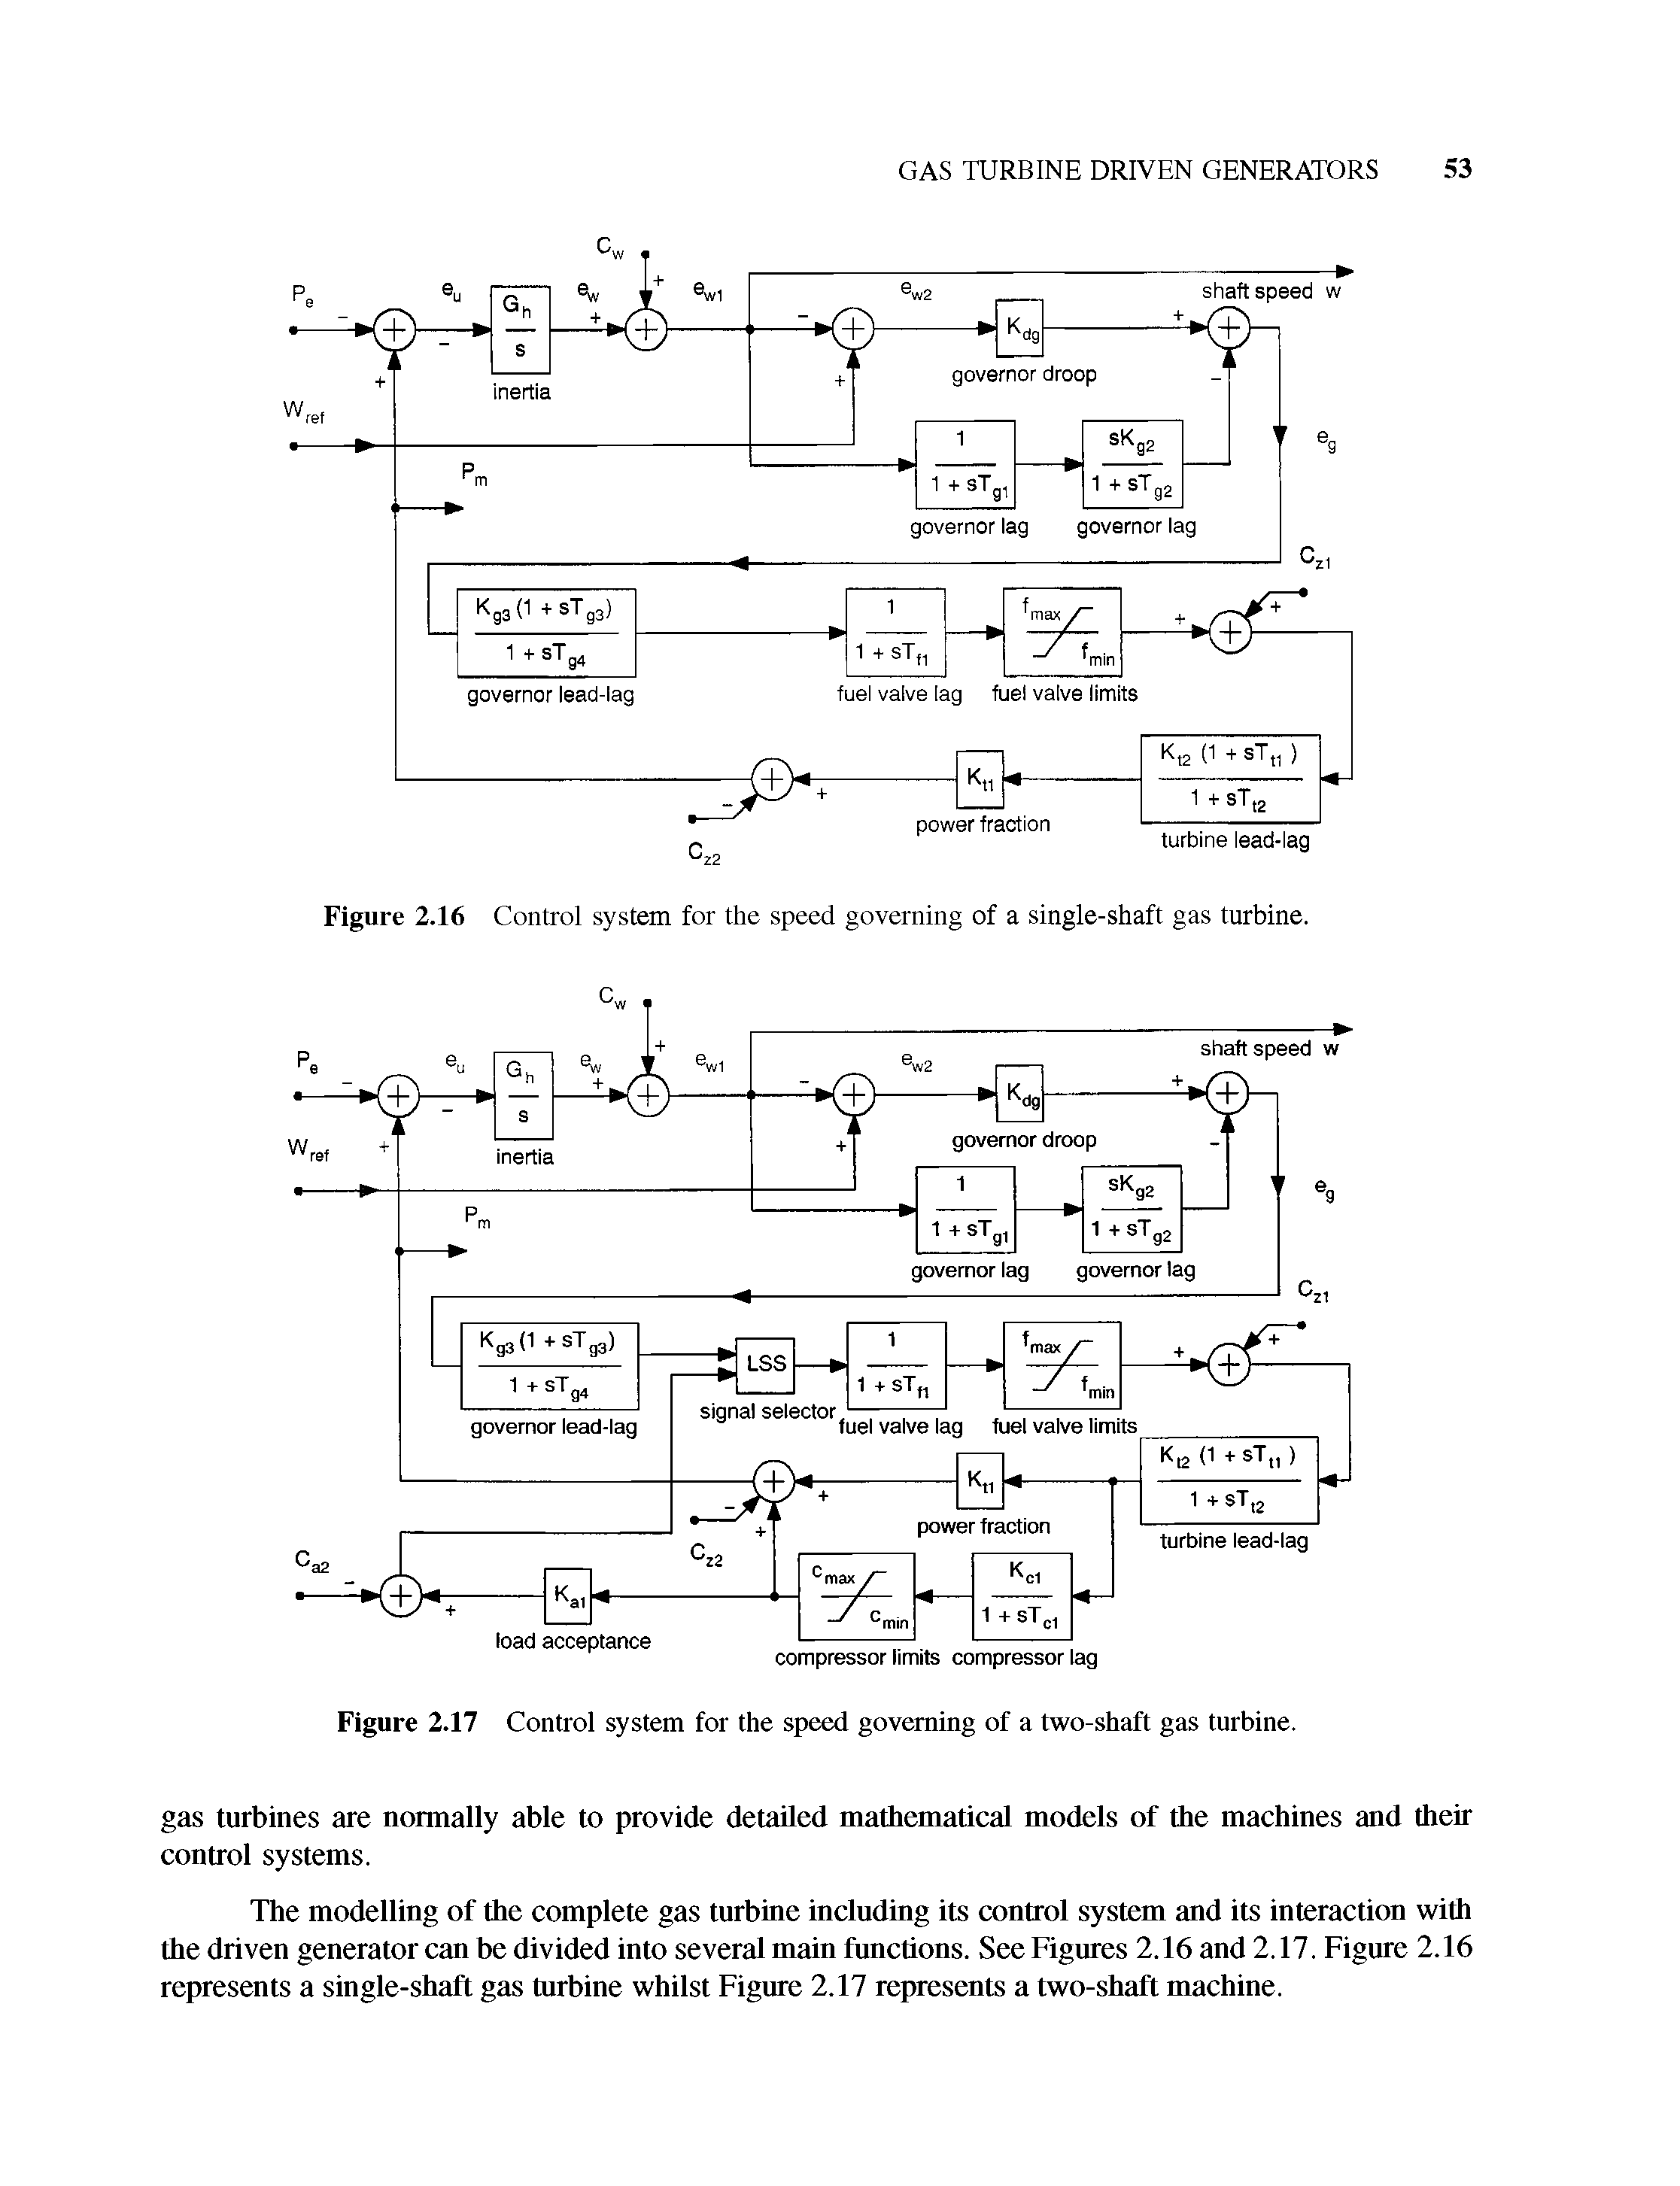 Figure 2.16 Control system for the speed governing of a single-shaft gas turbine.